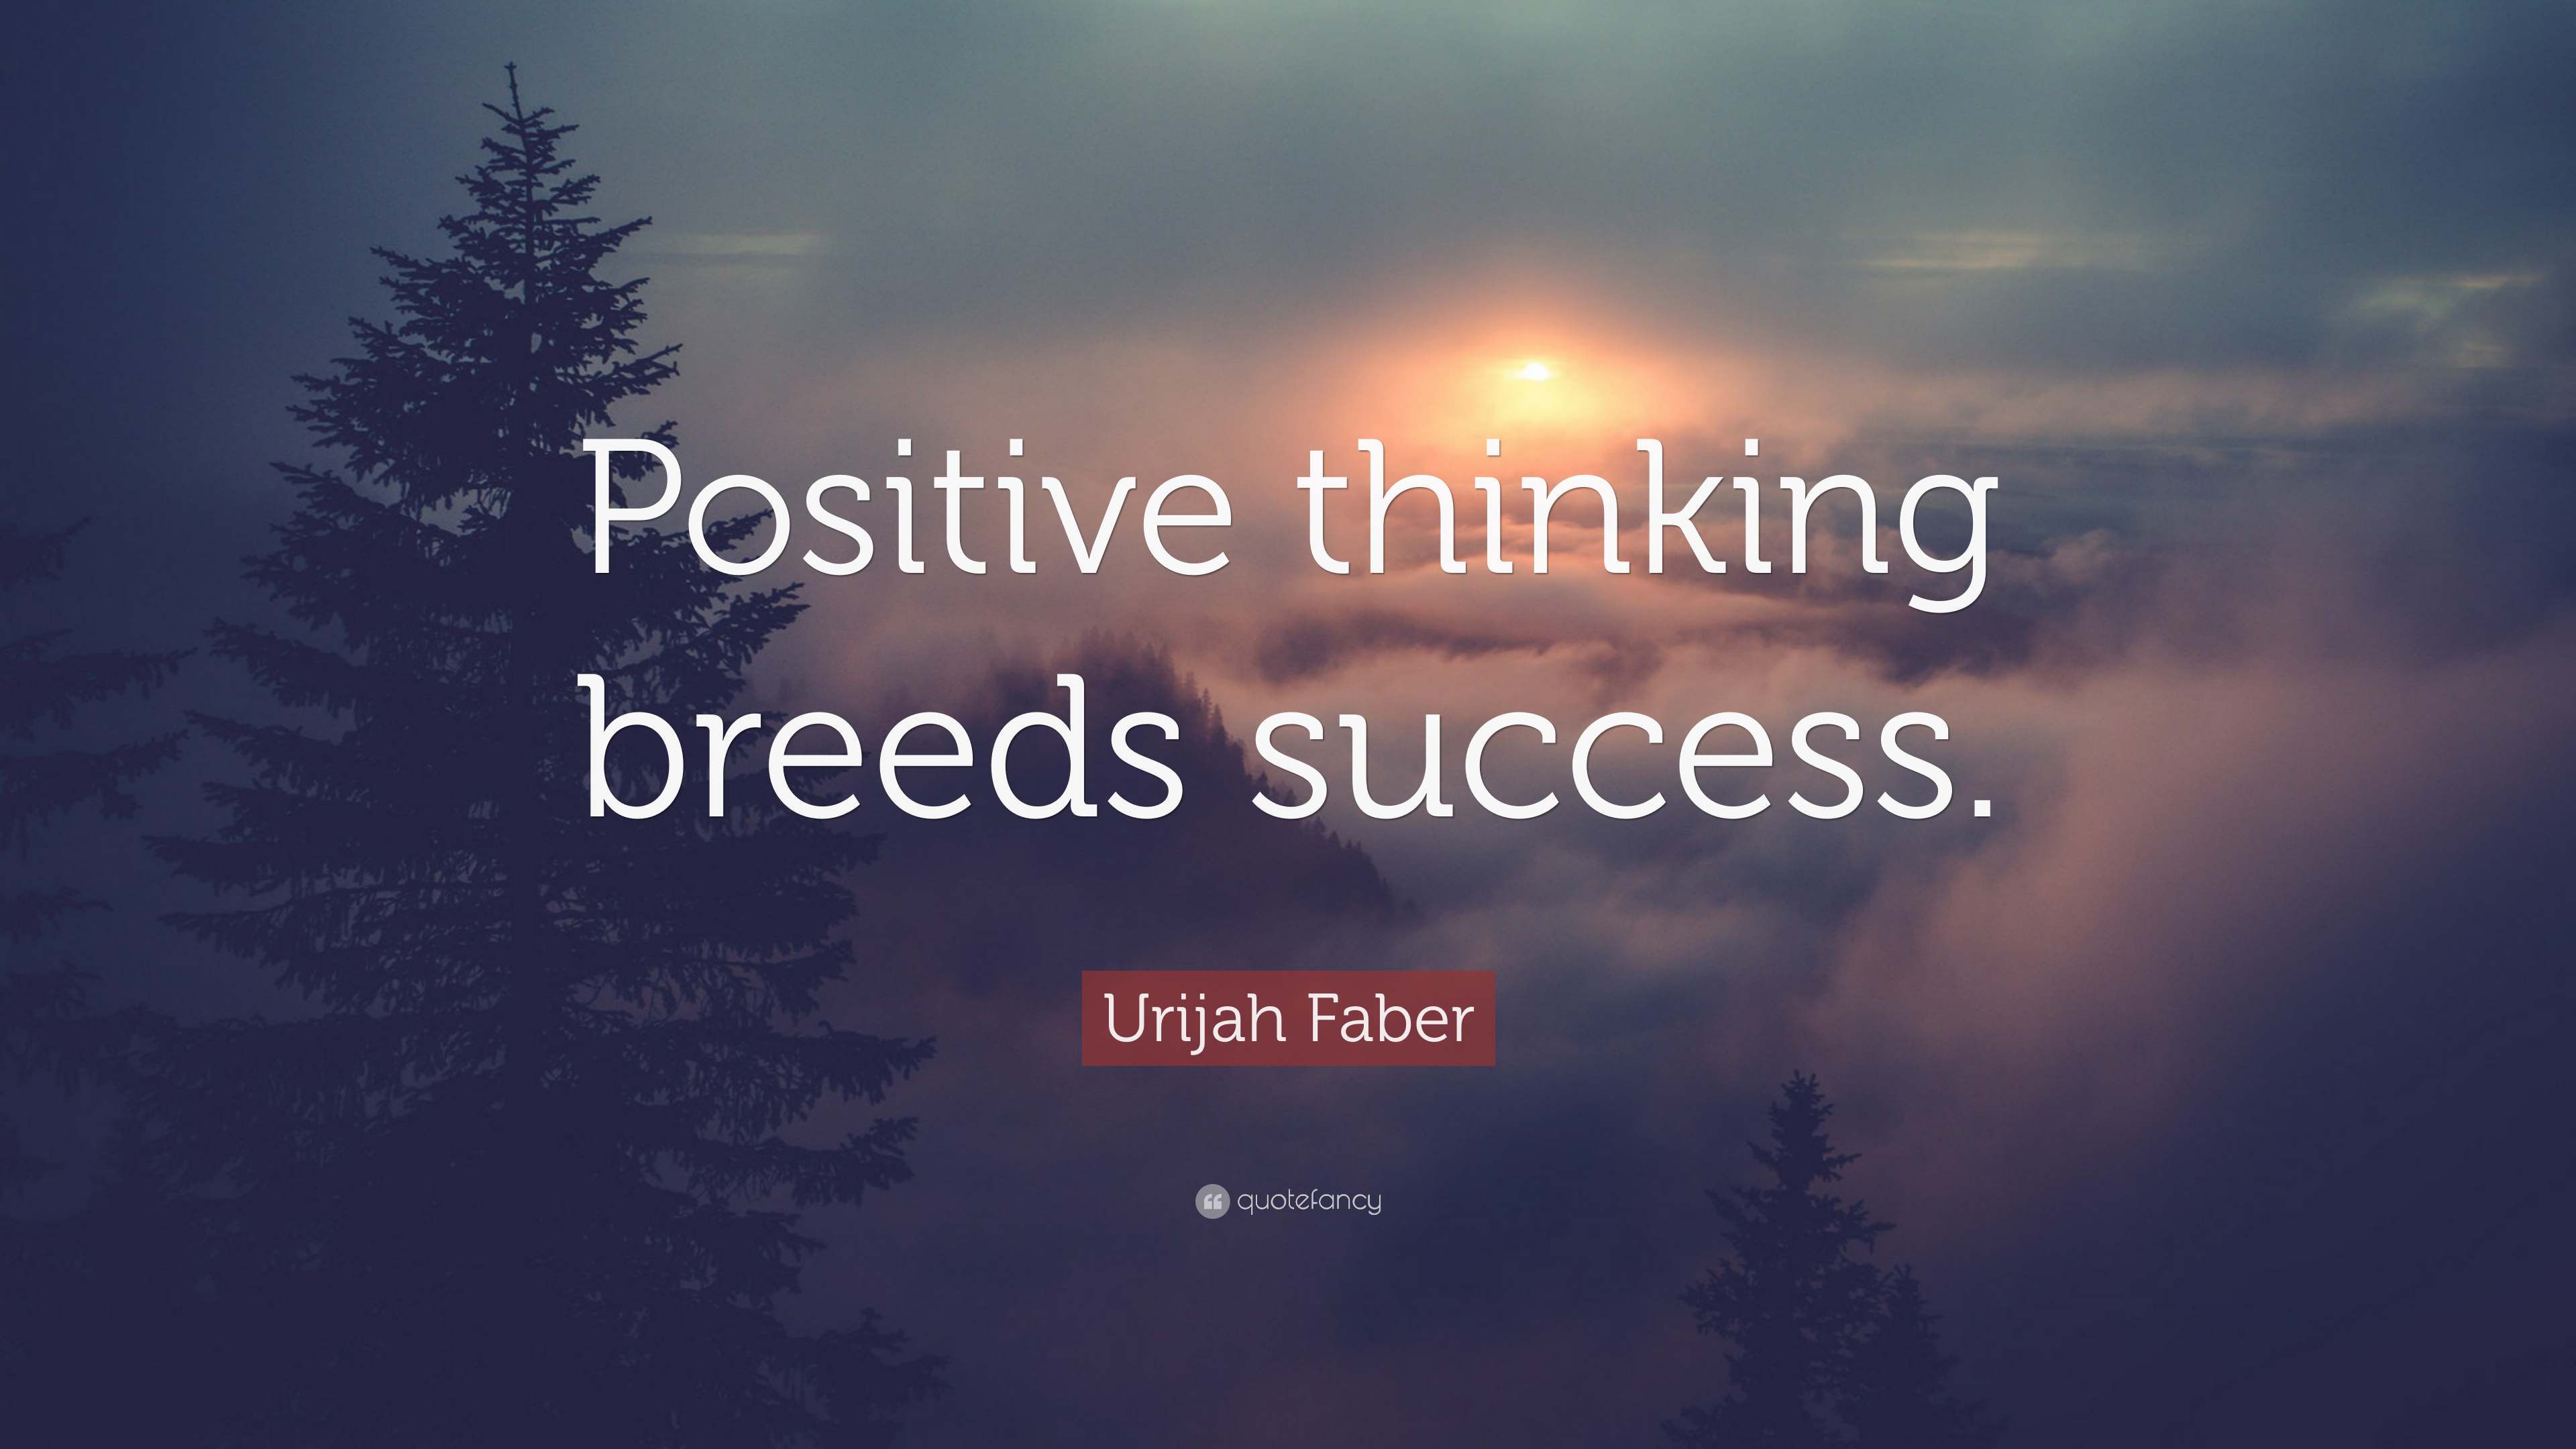 Urijah Faber Quote: “Positive thinking breeds success.” (9 wallpaper)